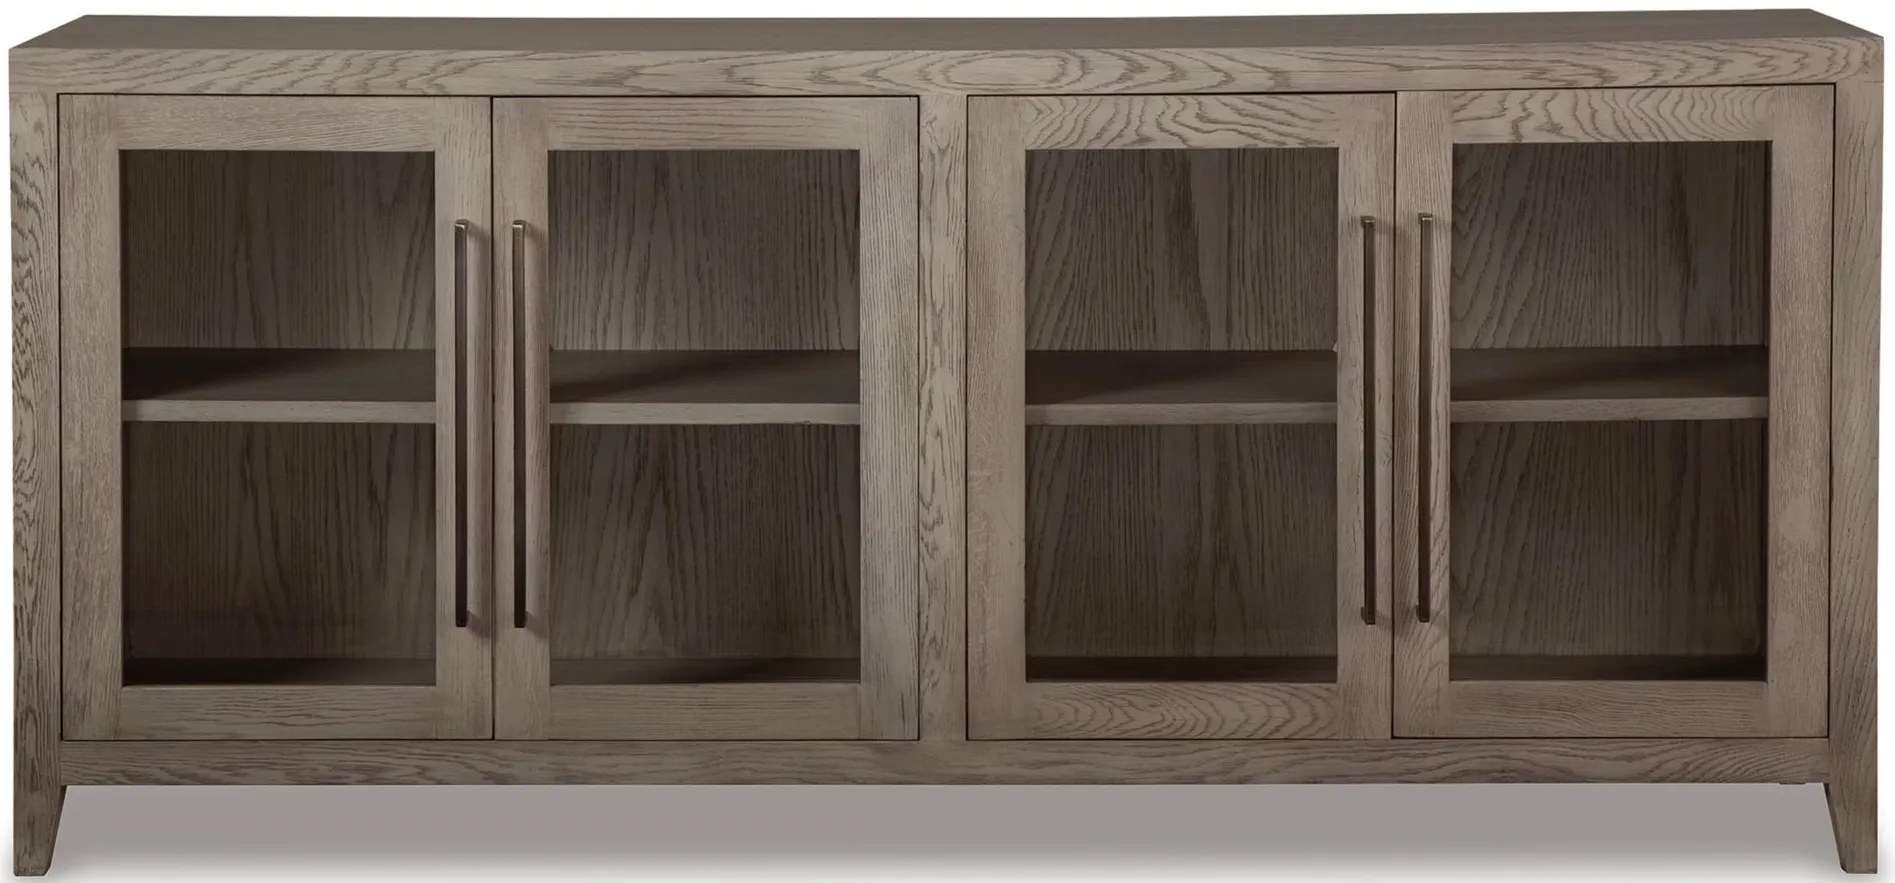 Dalenville Accent Cabinet in Warm Gray by Ashley Furniture